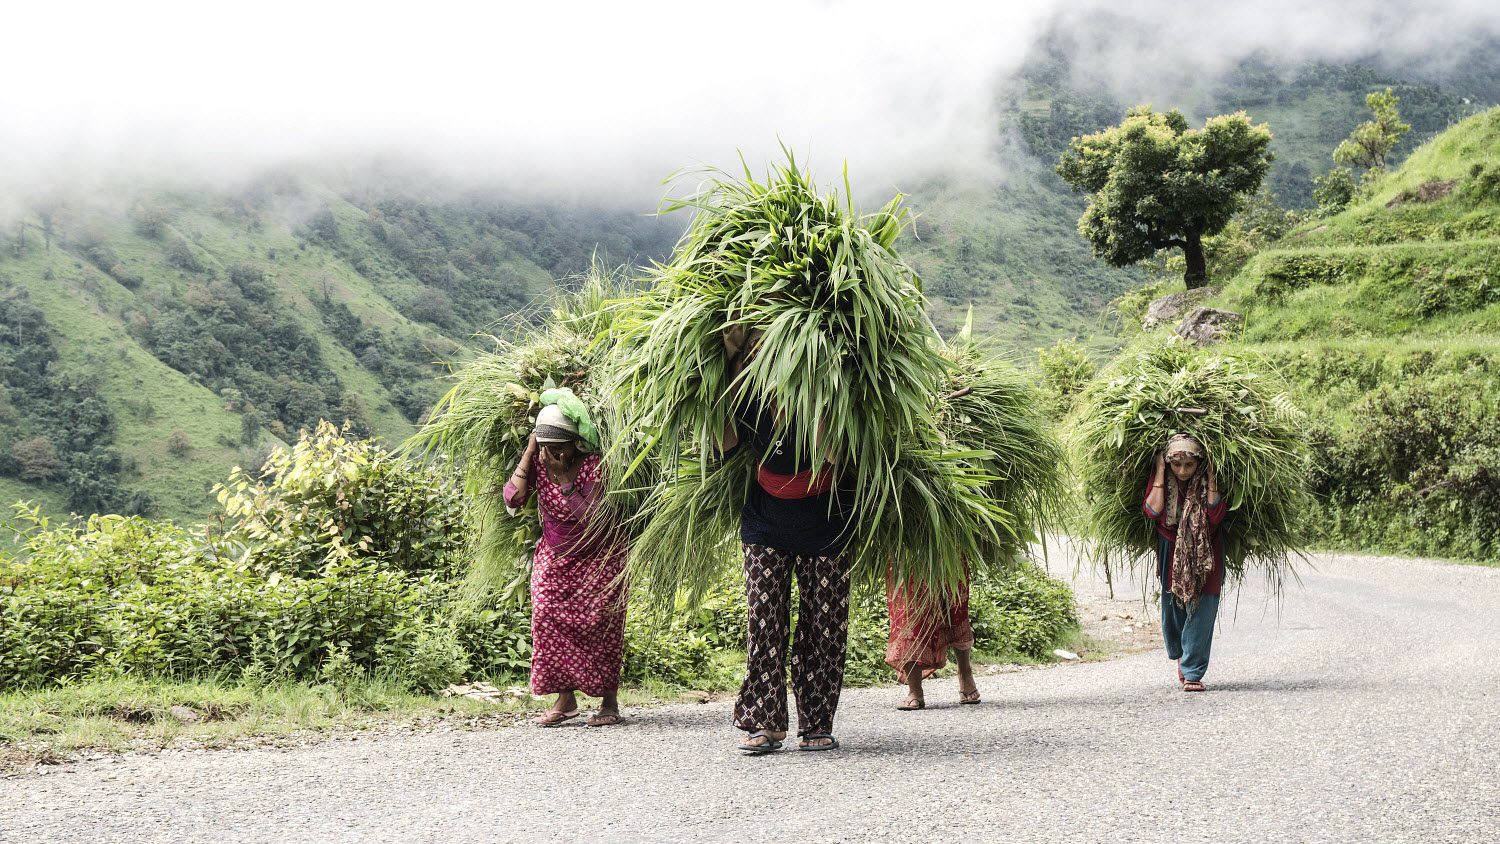 Nepal- People collecting forage to feed animals on the road between Kathmandu and Sandhikharka.